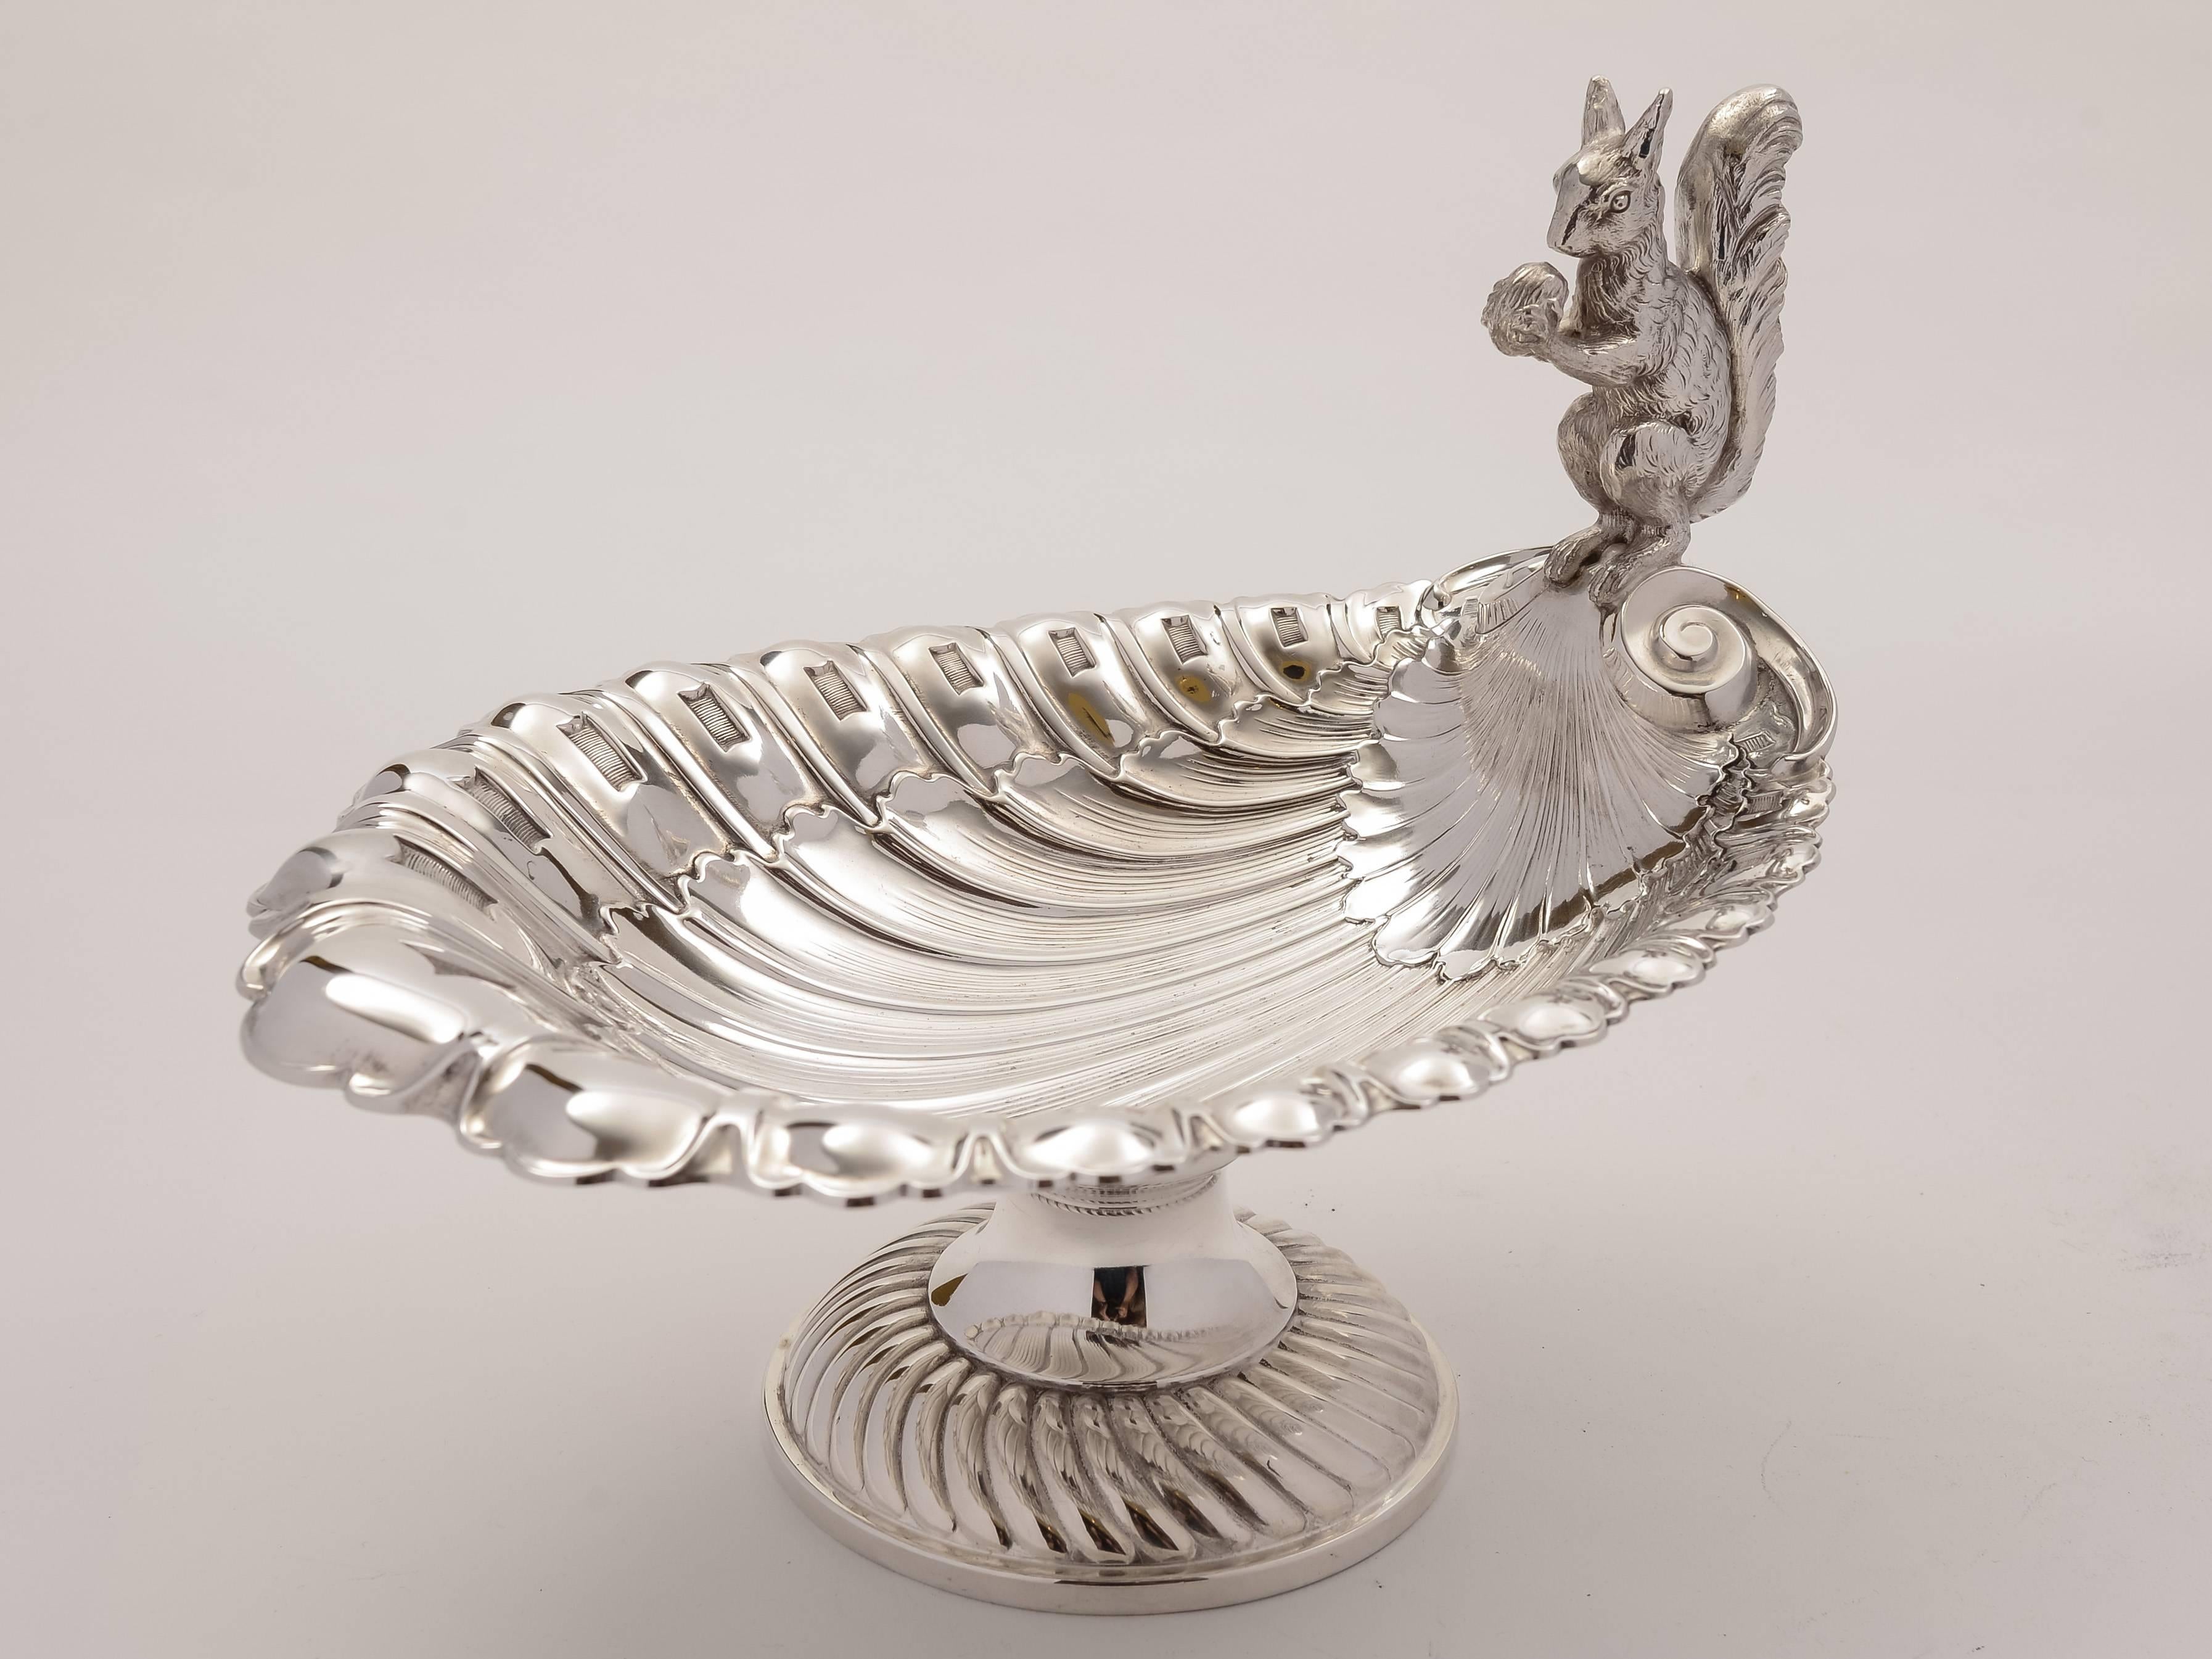 A lovely WMF German silver plated squirrel nut serving dish with fluted decoration and squirrel perched at one end, circa 1910.

Total weight: 772g.

